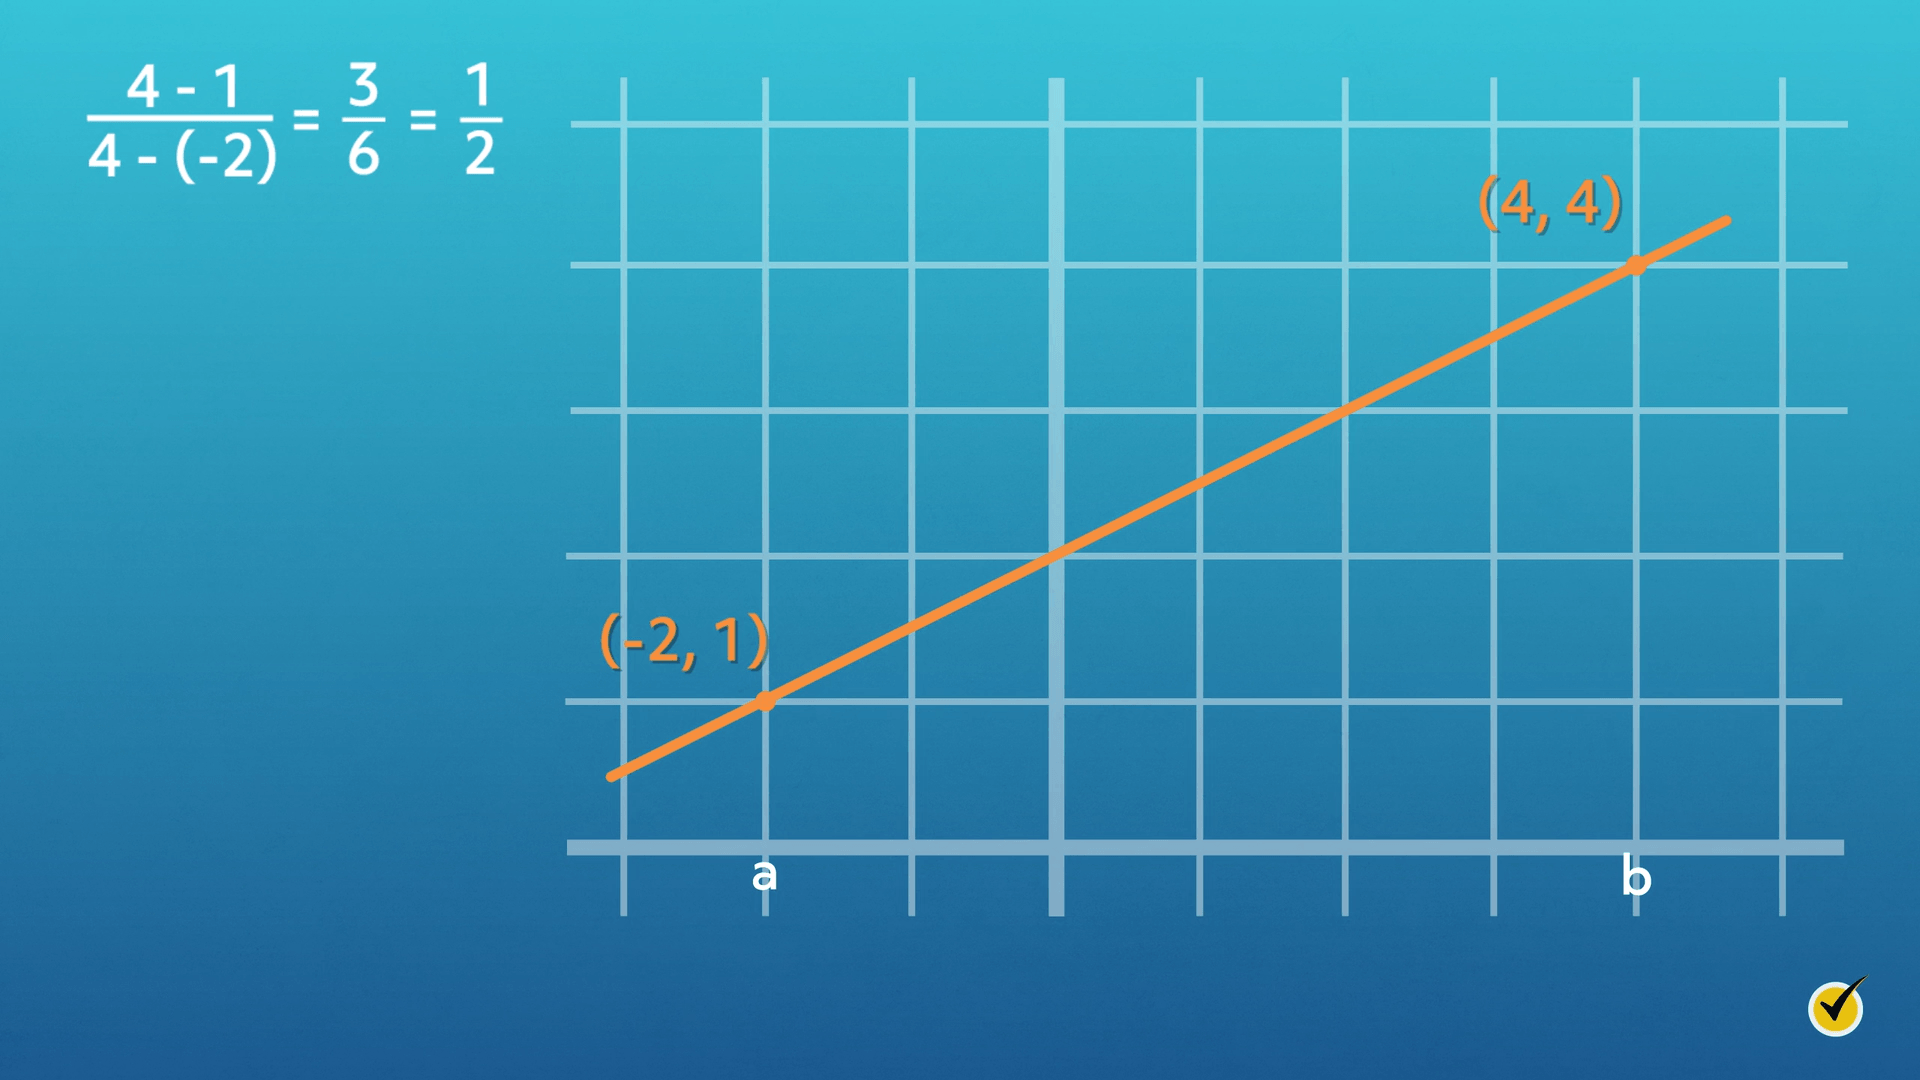 points (-2,1) (4,4) with a slope of 1 over 2.